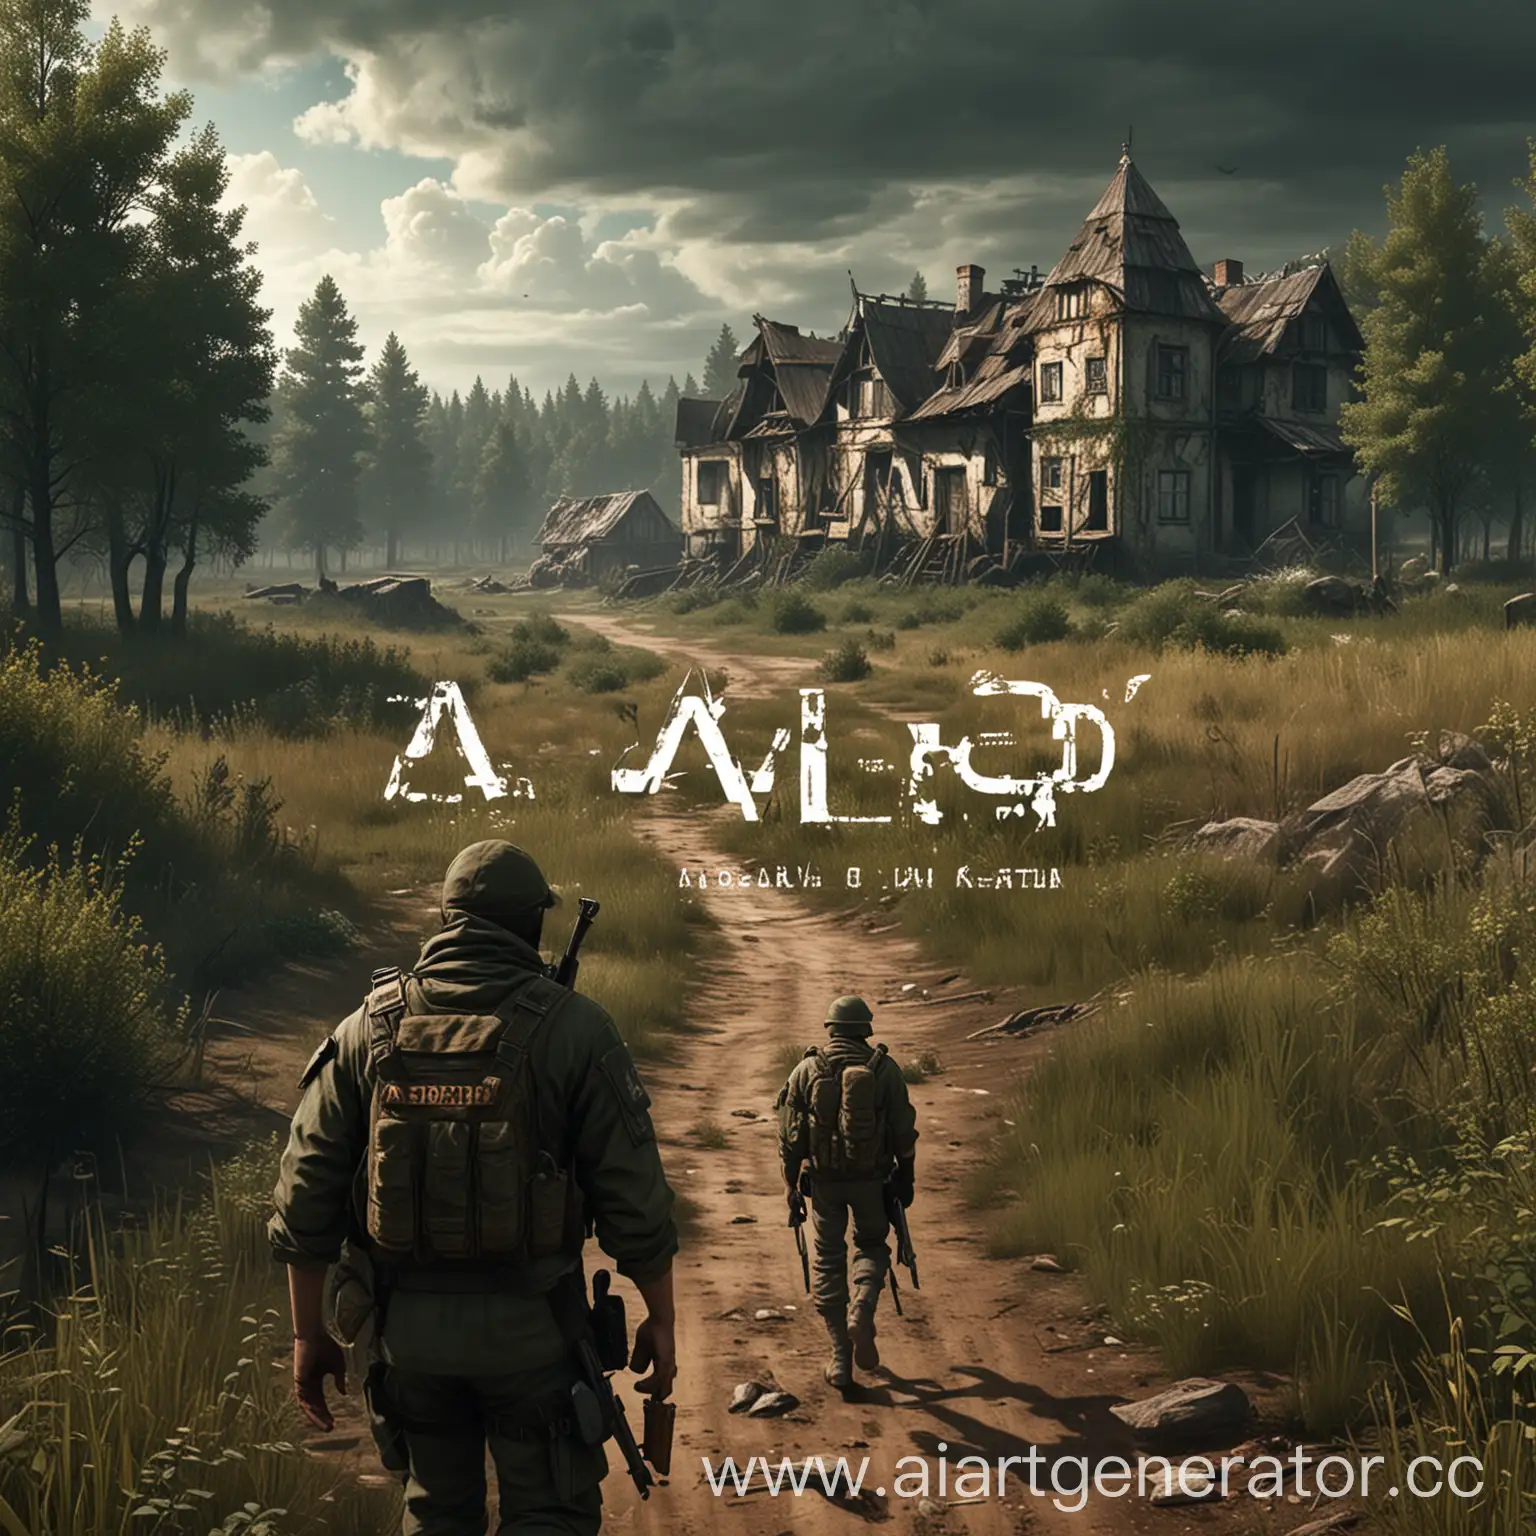 DZ-Avalon-Loading-Screen-Armed-Stalker-in-Field-with-Ruined-Houses